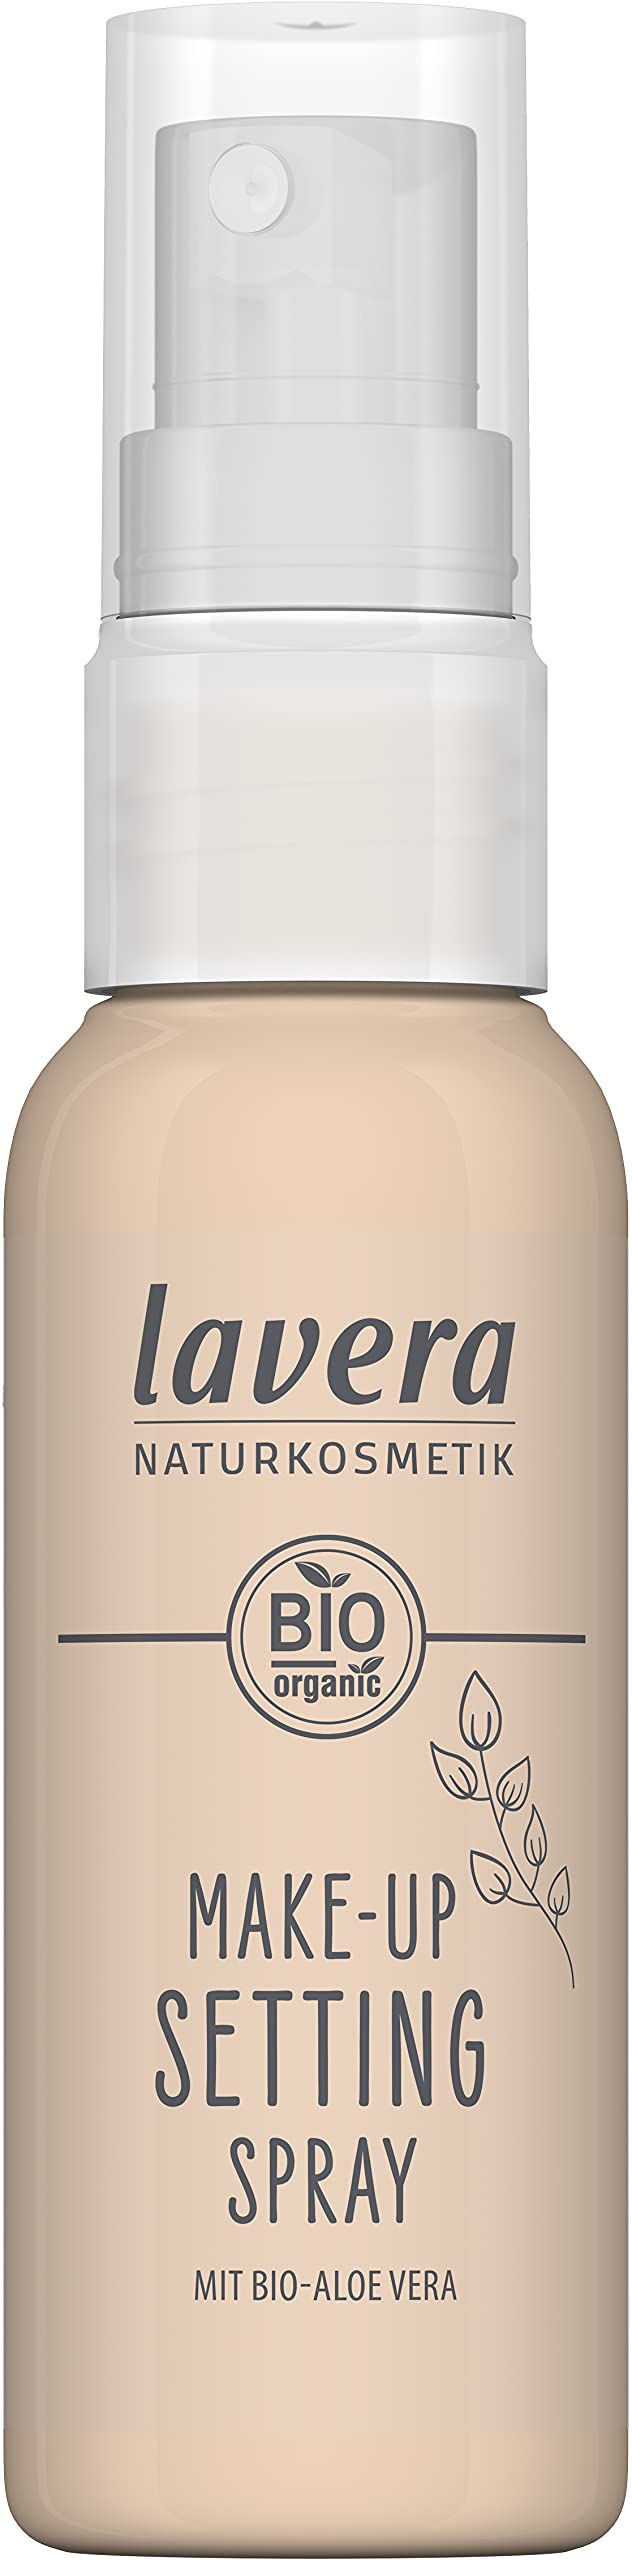 lavera Make-up Setting Spray - refresh - natural cosmetics - Vegan - free from alcohol - free from silicones - Suitable for all skin types - Organic aloe vera & Vegetable gylcerin - 50ml, transparent - NewNest Australia